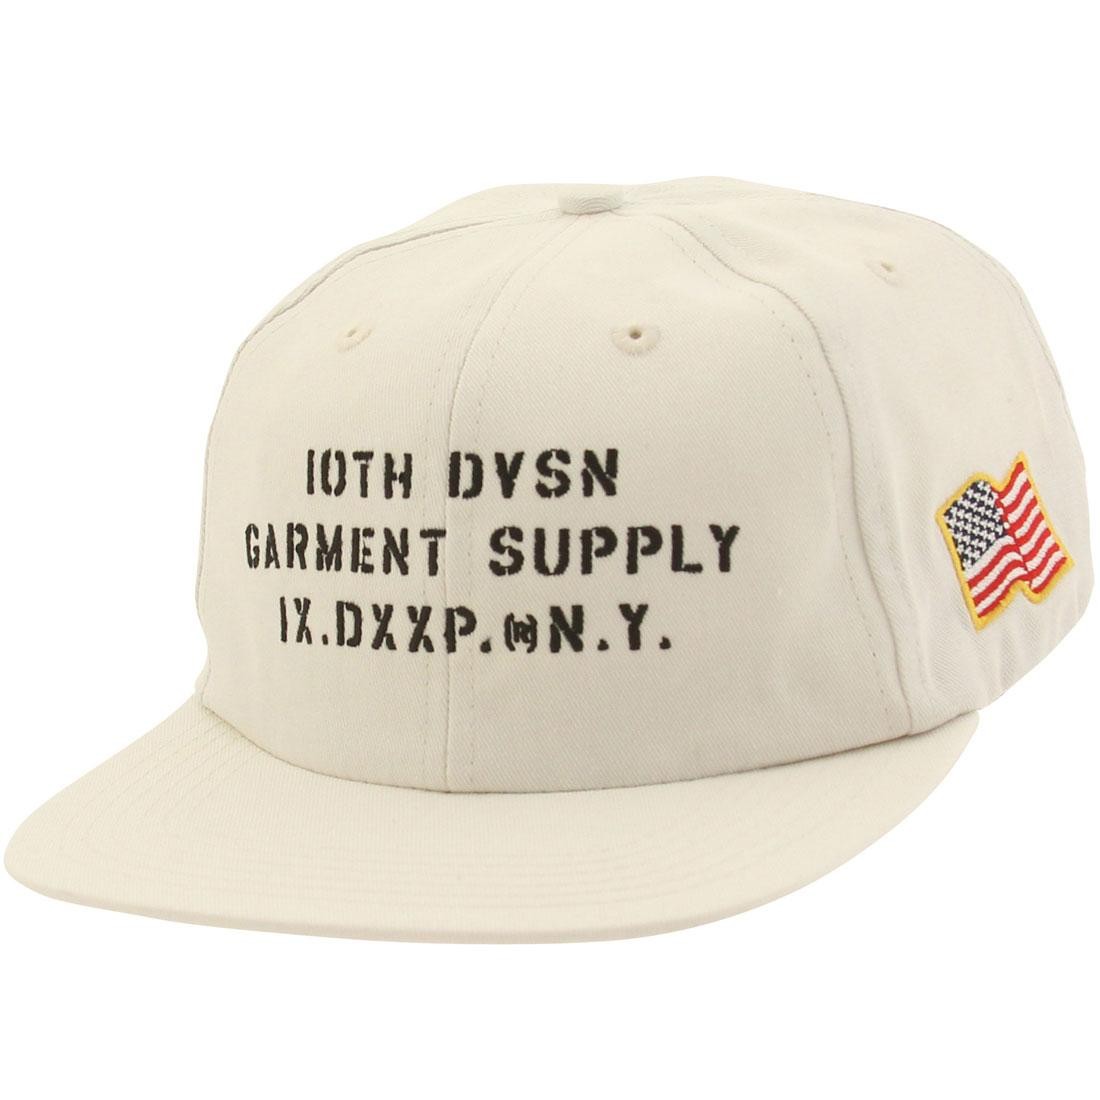 10 Deep Stenciled Snapback Cap (white / off white)